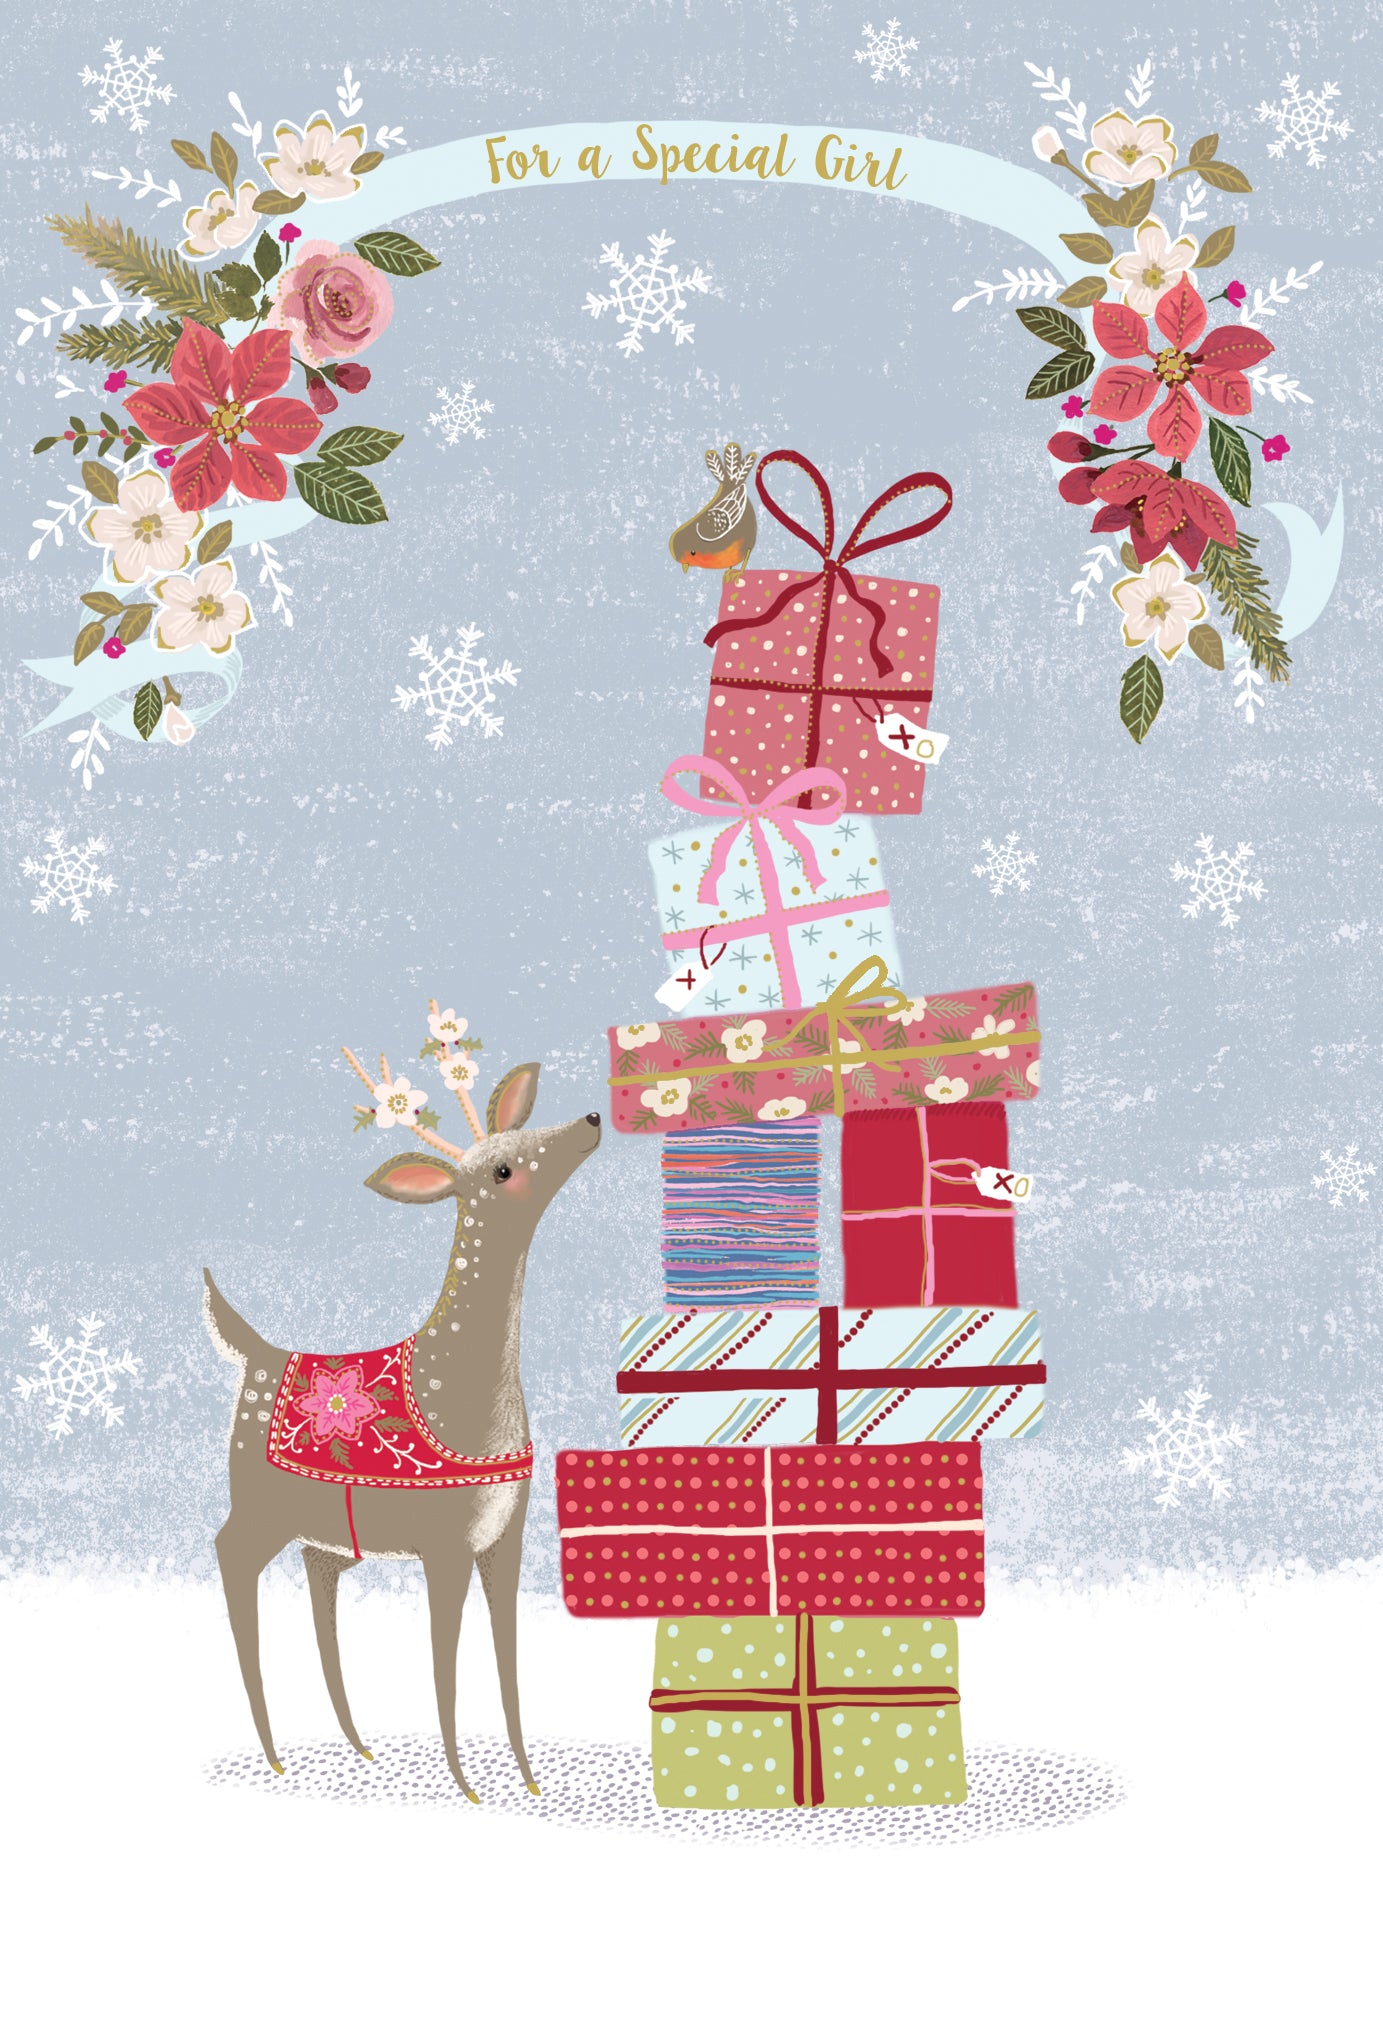 For a special girl - Christmas Card - Special Girl - Cardmore